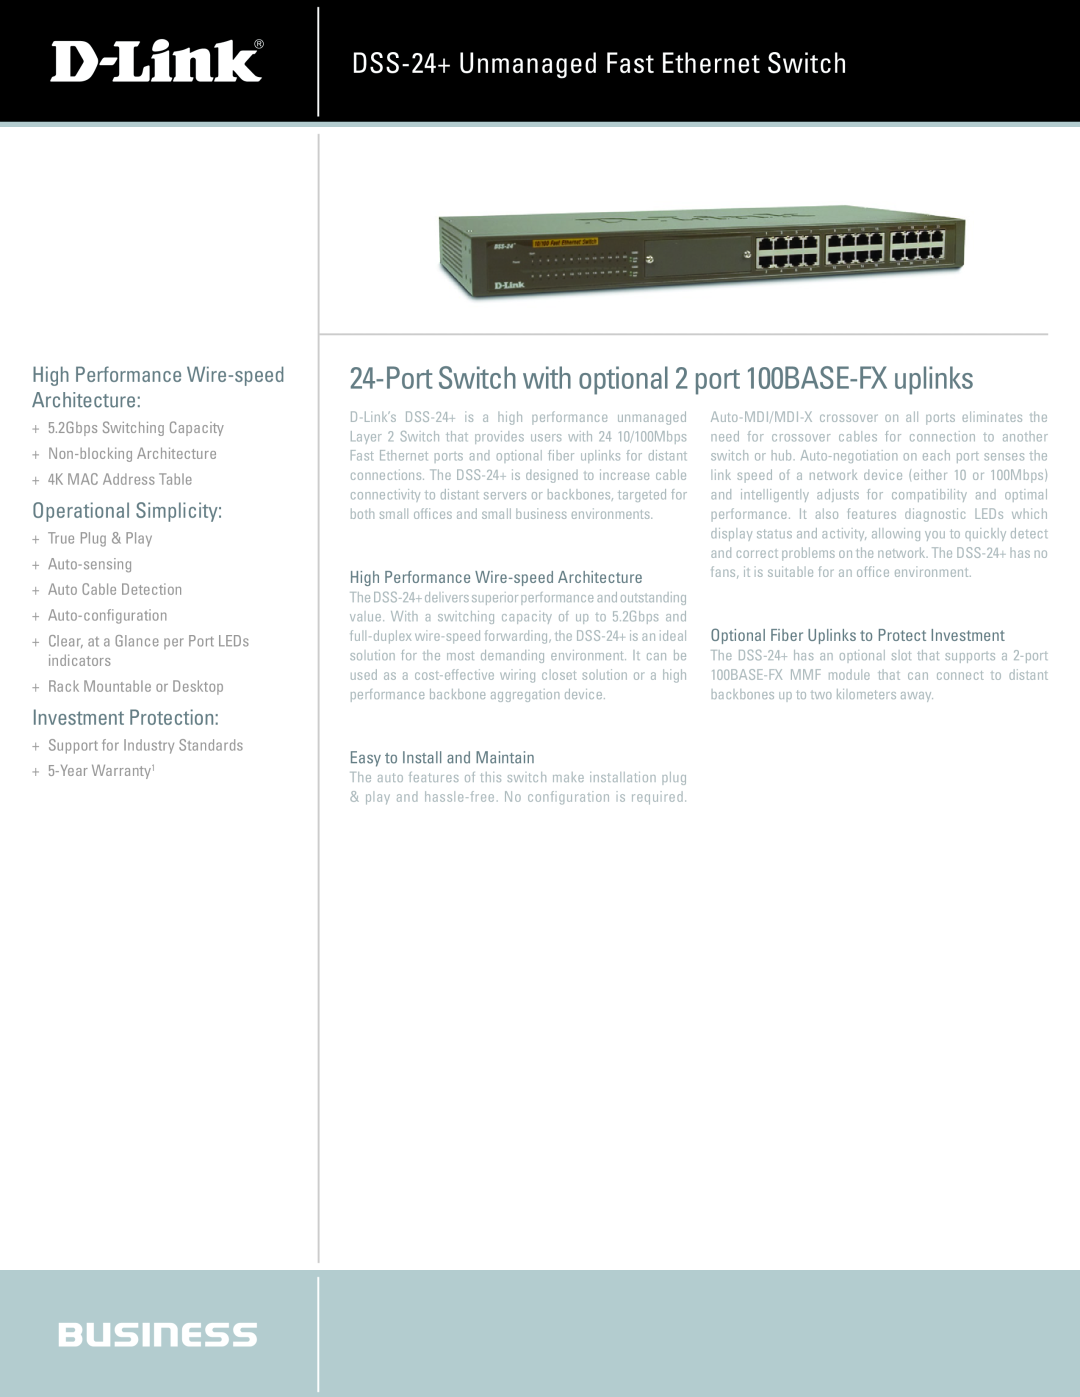 D-Link DSS-24+ warranty Port Switch with optional 2 port 100BASE-FX uplinks, High Performance Wire-speed Architecture 